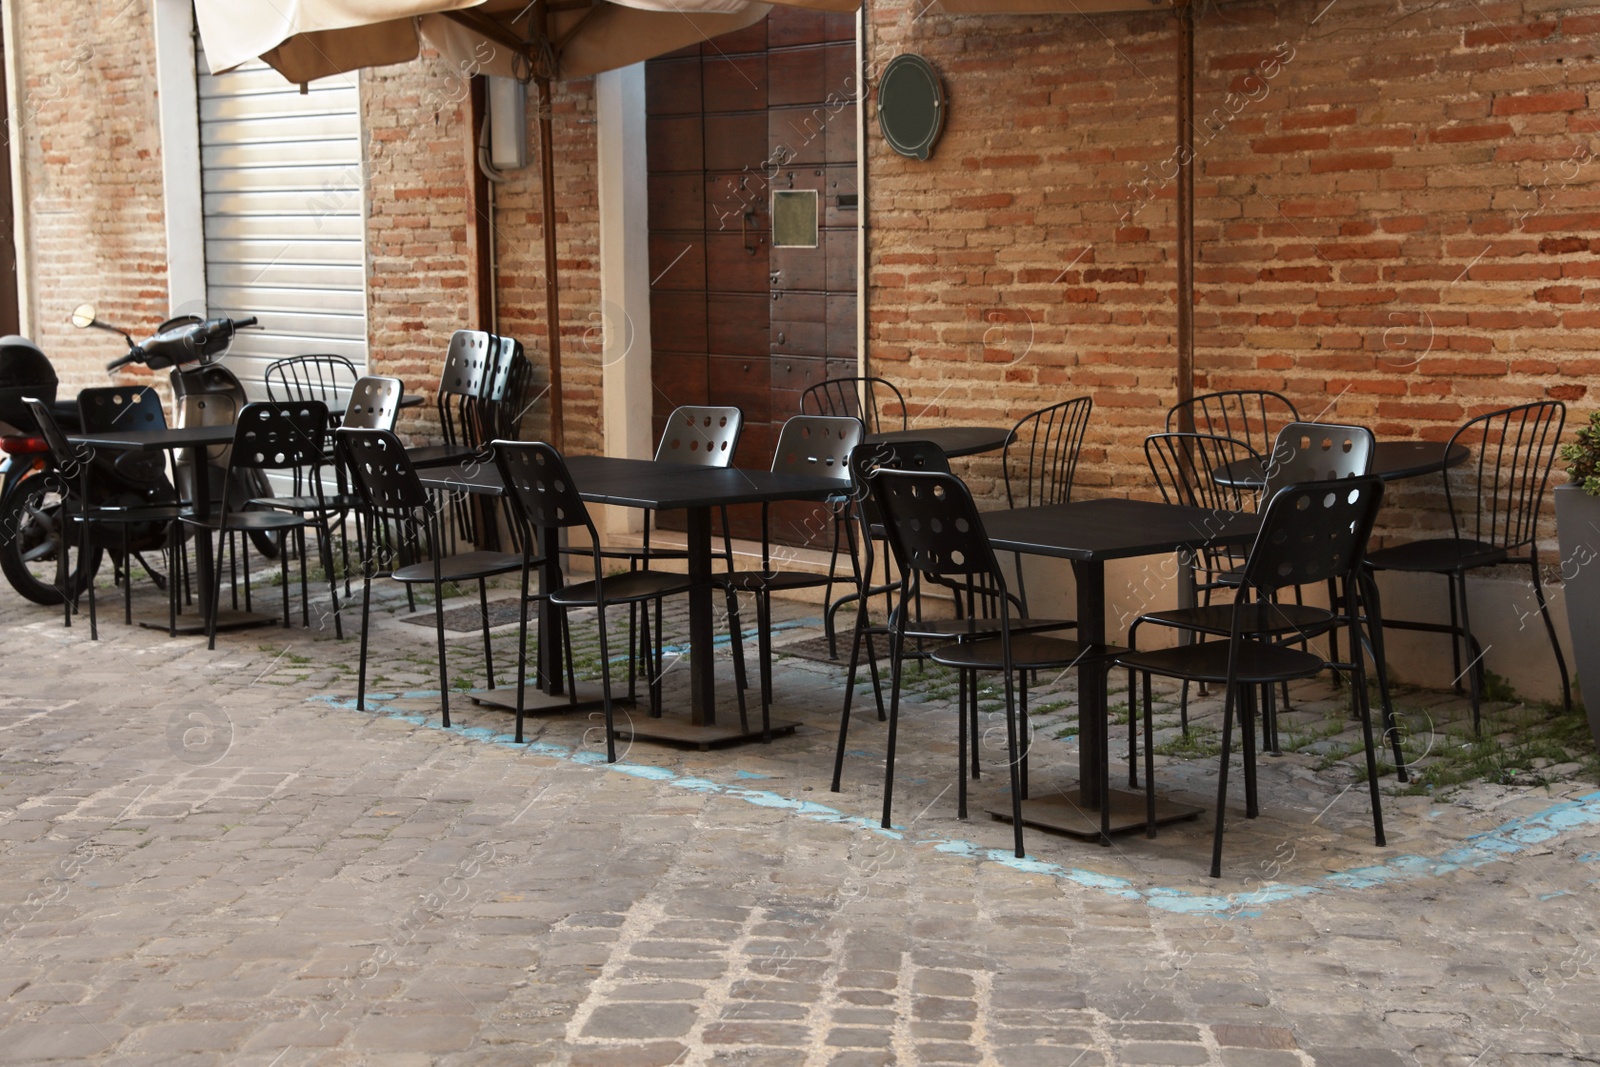 Photo of Tables and chairs near building. Outdoor cafe